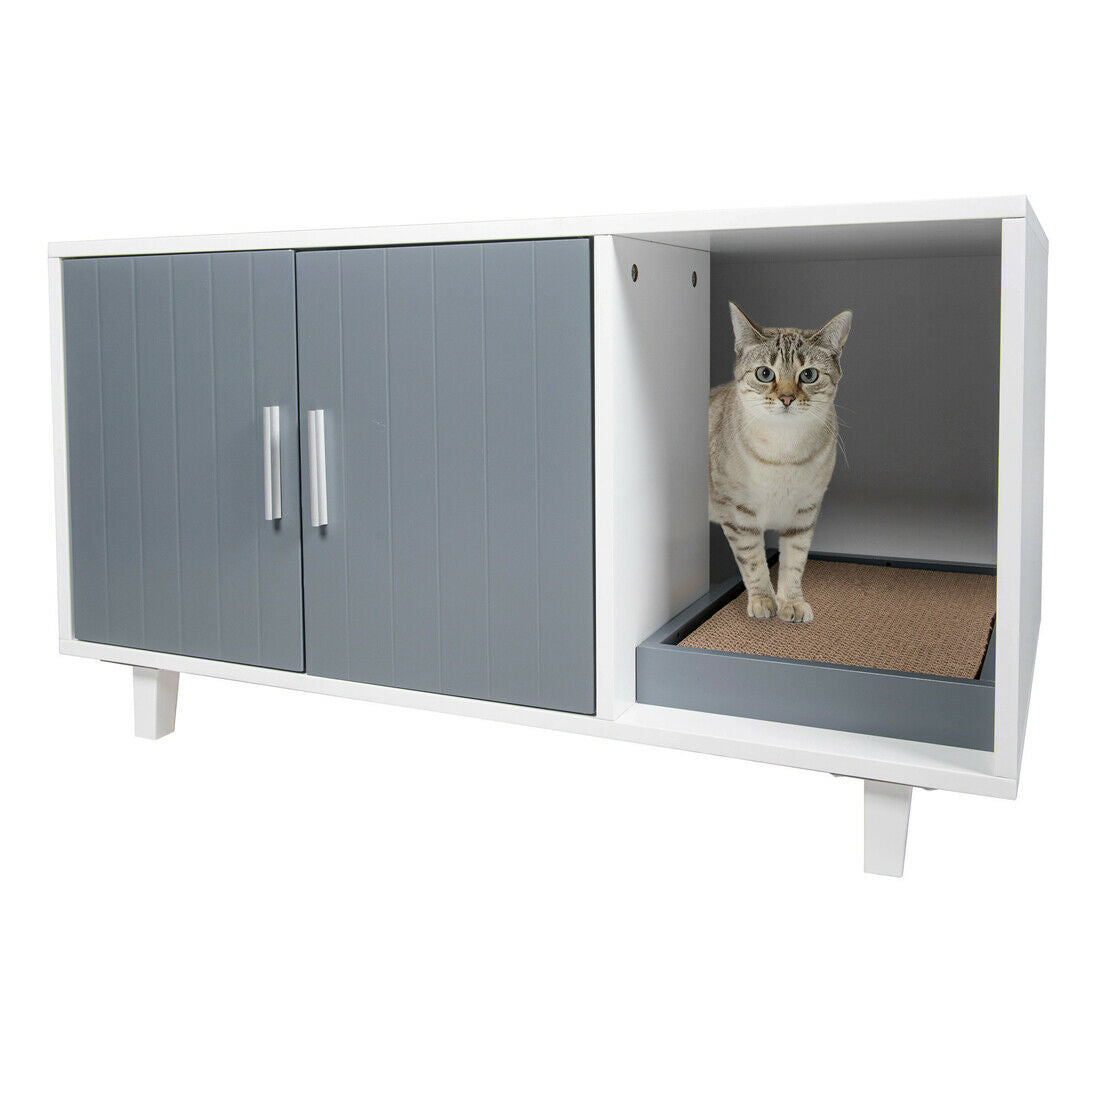 Lords & Labradors Cat Washroom, Cat Bed/litter Tray With Shelf for